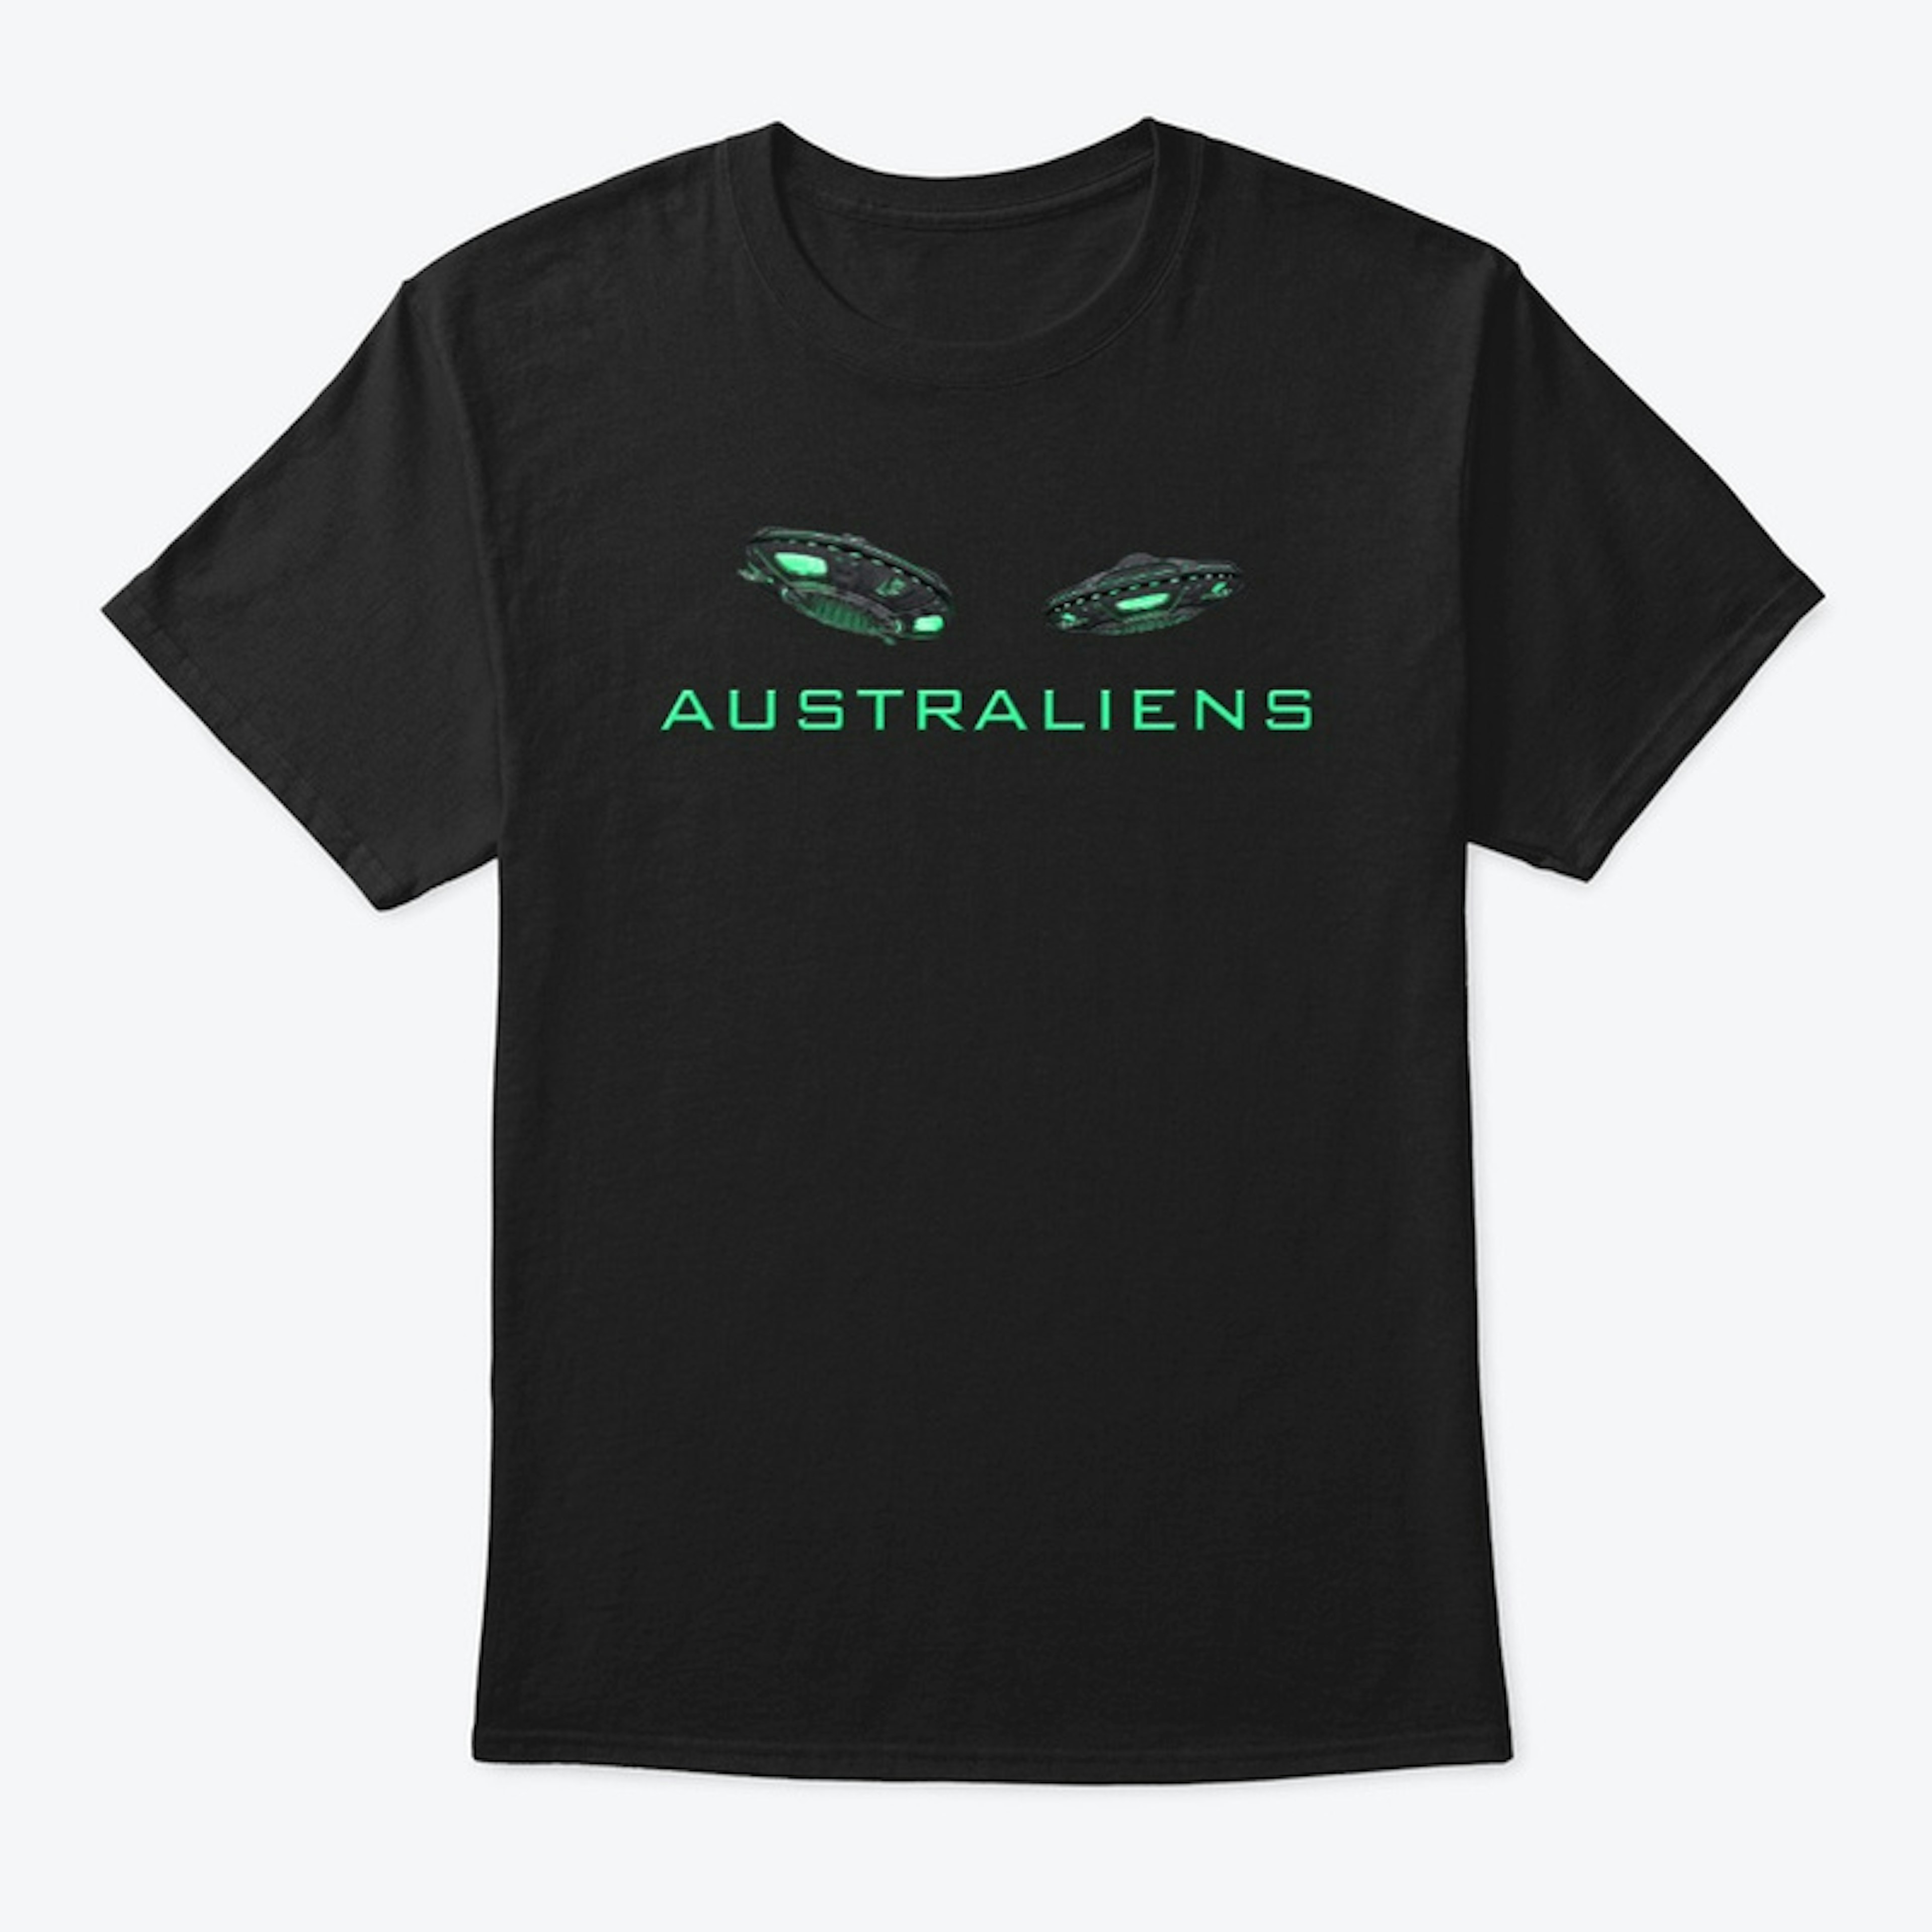 Australiens - Title and UFOs